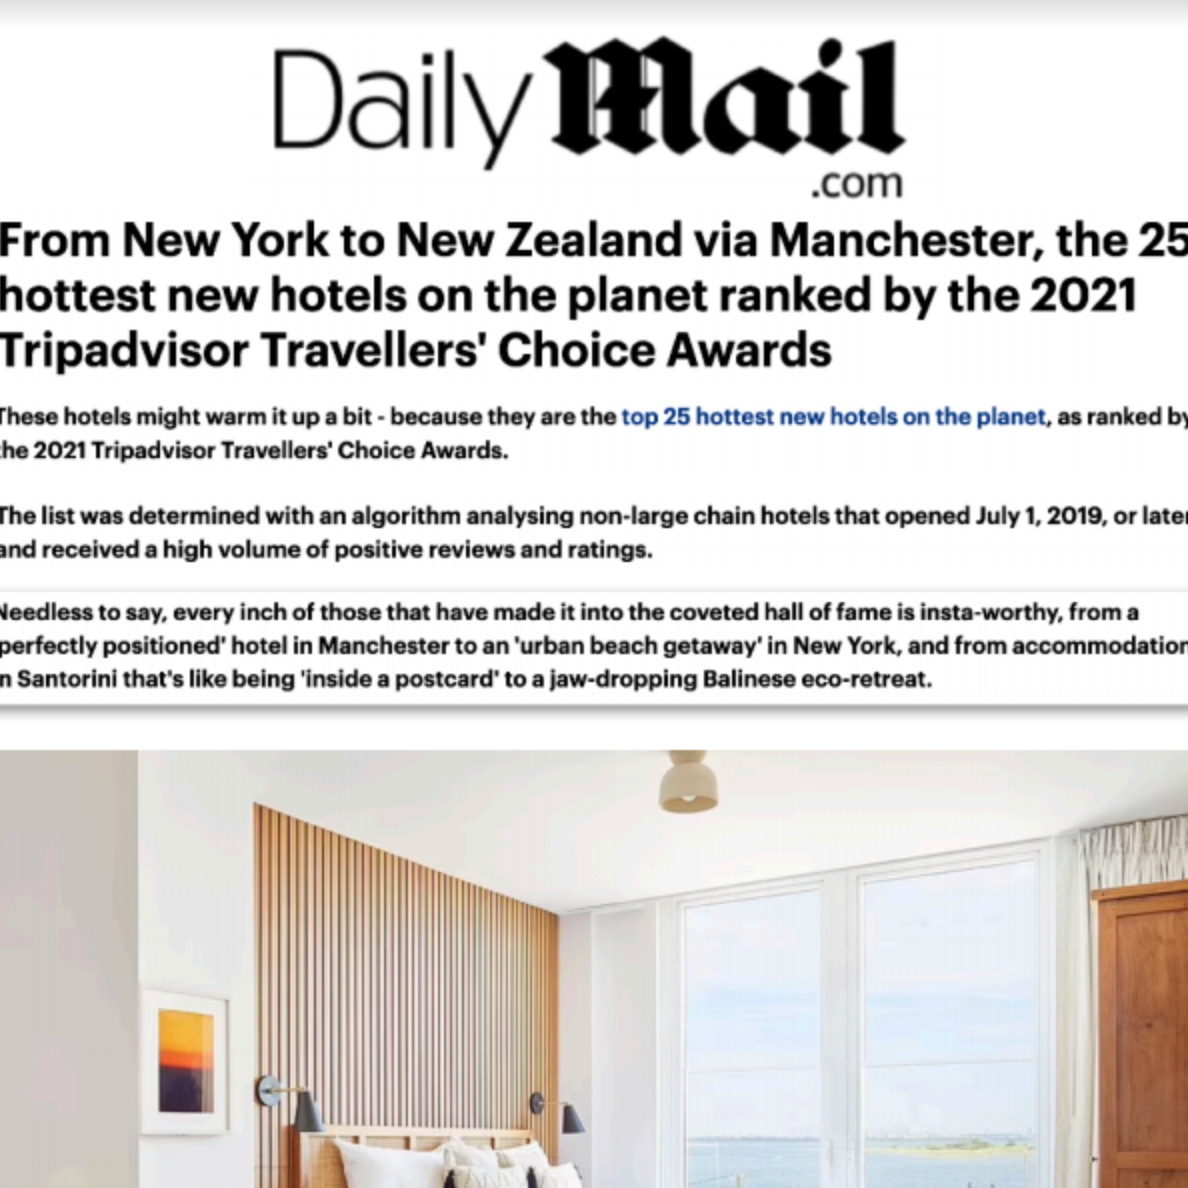 Article about The Rockaway Hotel in Daily Mail 